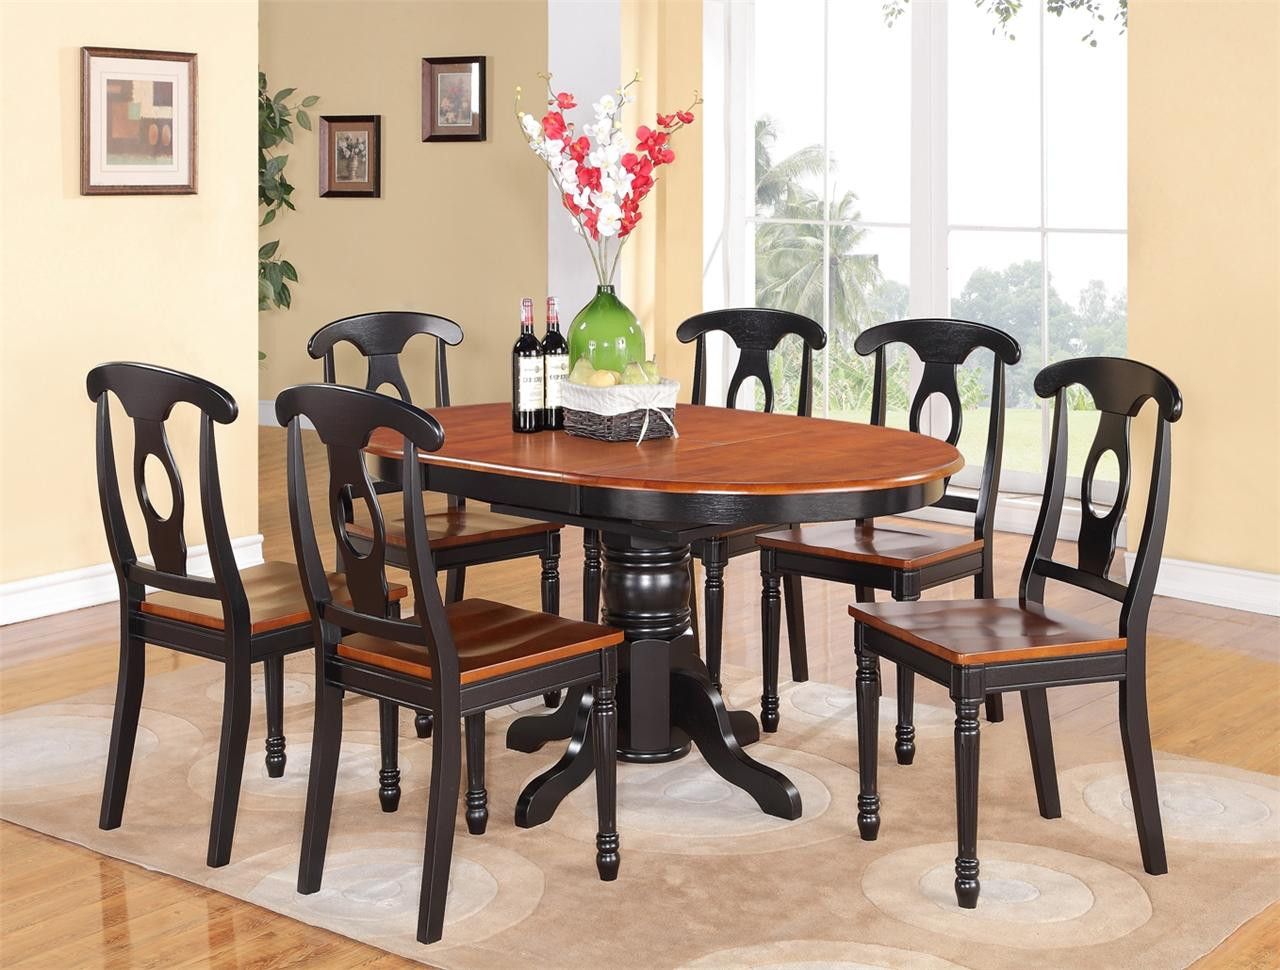 Small Black Kitchen Table
 Black and brown dining room sets black kitchen table and